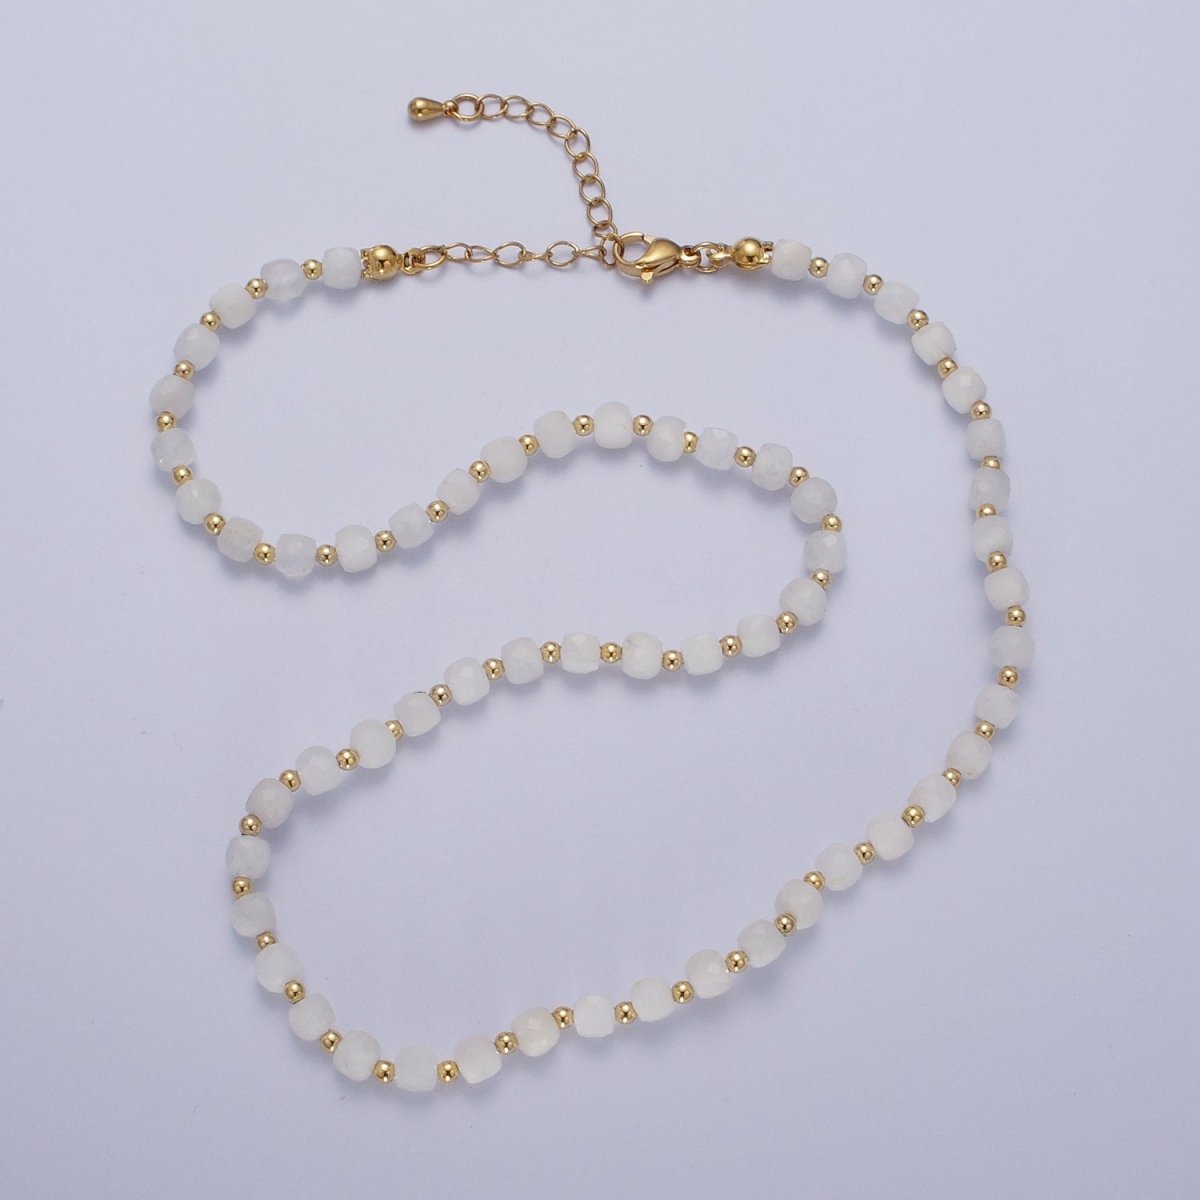 16 Inch Natural White Jade Multi Faceted Cube Gemstone w. Gold Bead Choker Necklace | WA-1445 Clearance Pricing - DLUXCA